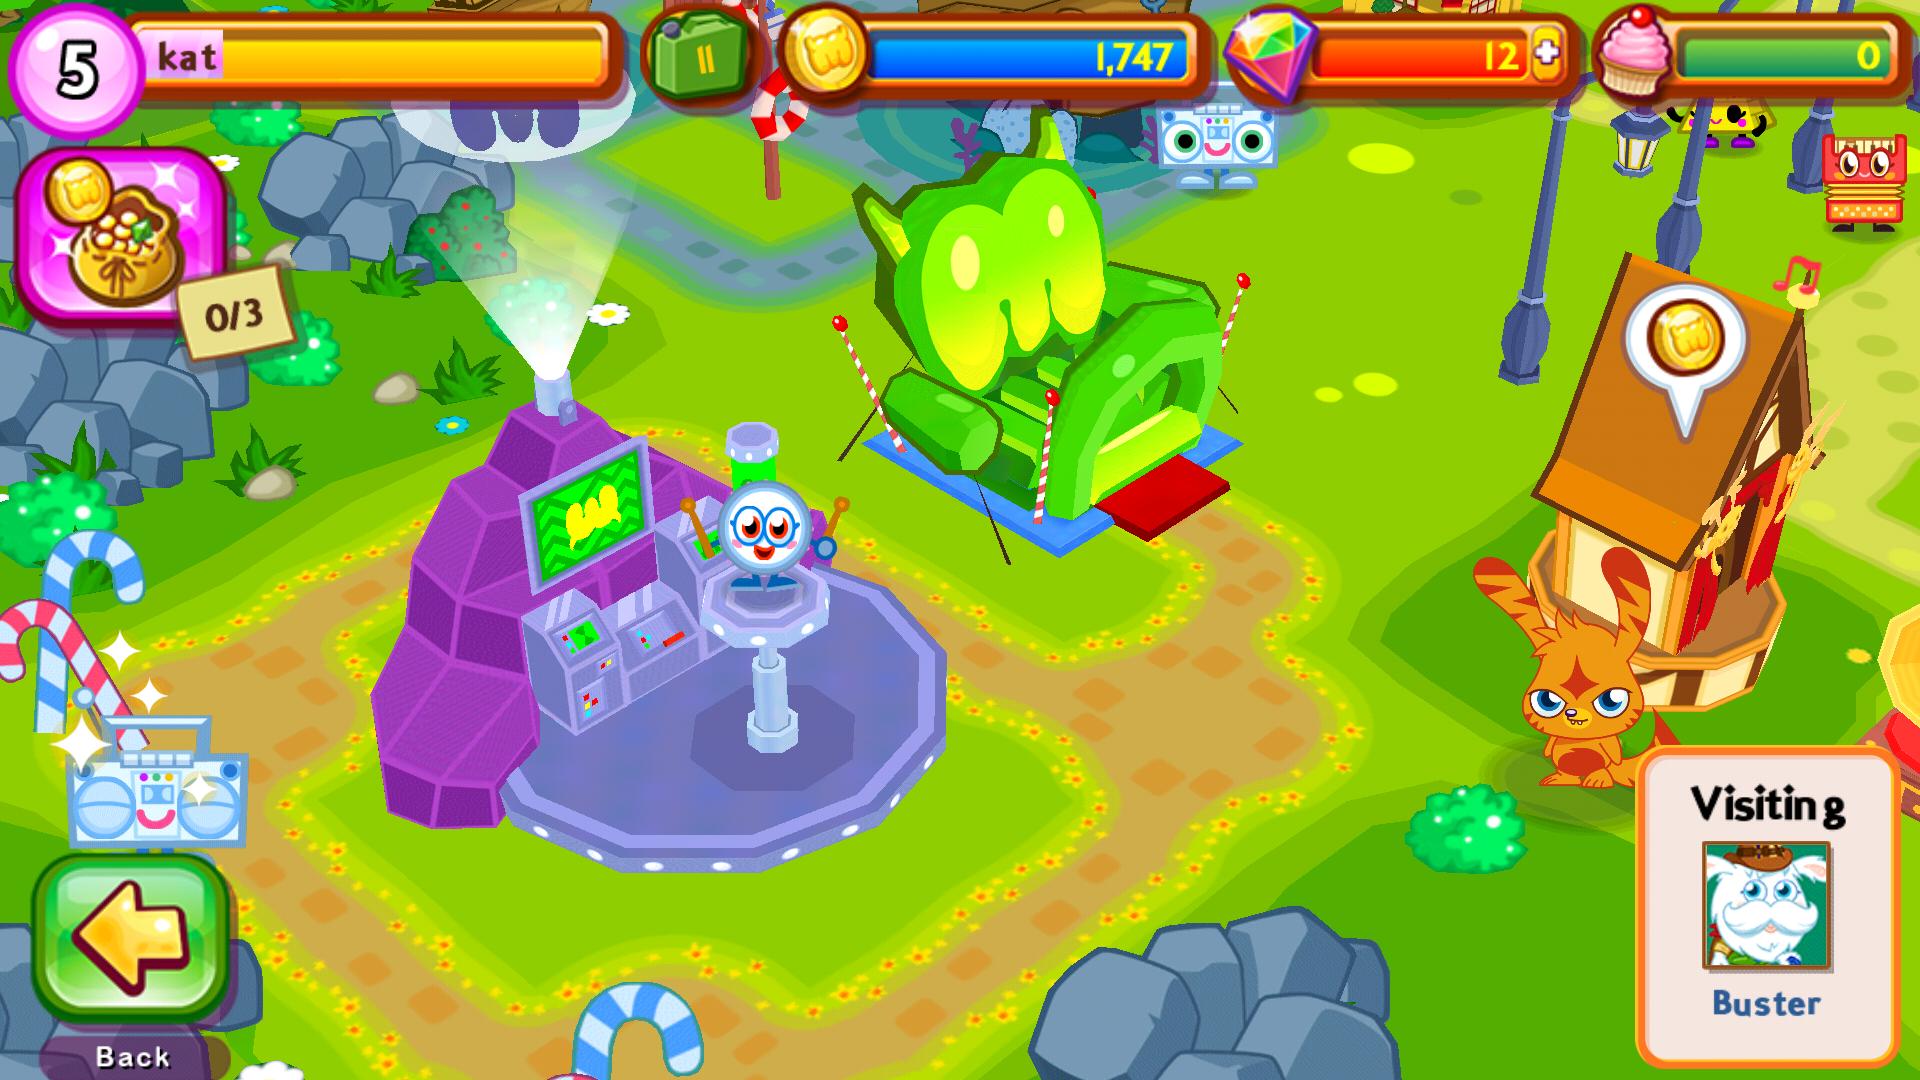 Village monsters. Moshi Monsters игра. Moshi Monsters Blingo. Moshi Monsters играть. Magical Moshi Monsters.